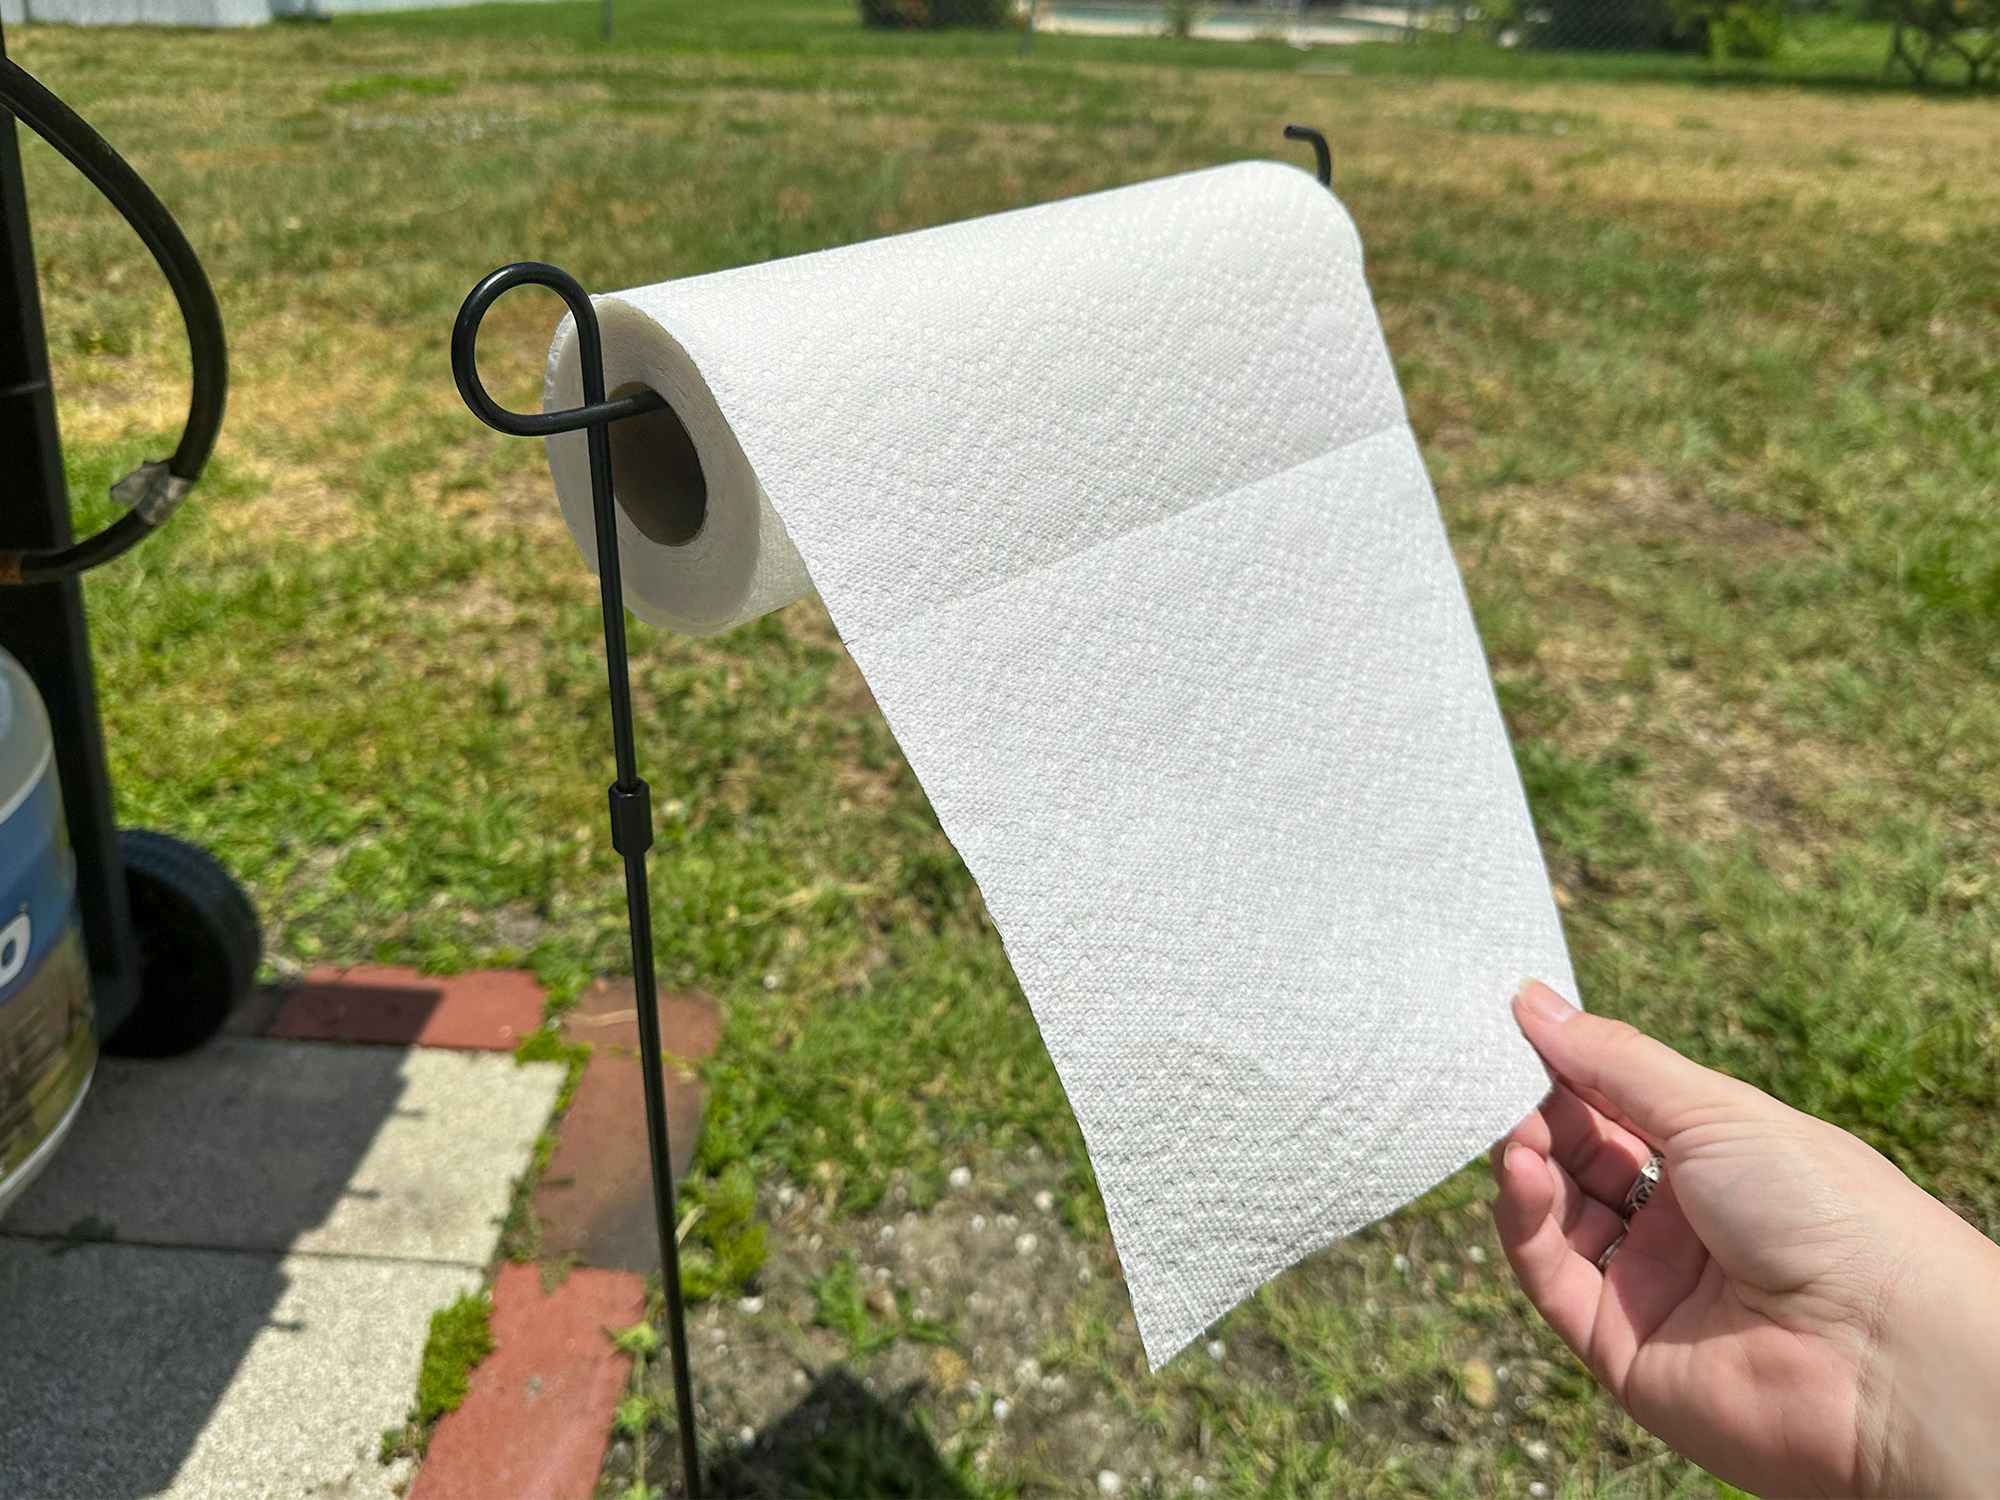 Someone taking a paper towel from a garden flag pole in the backyard